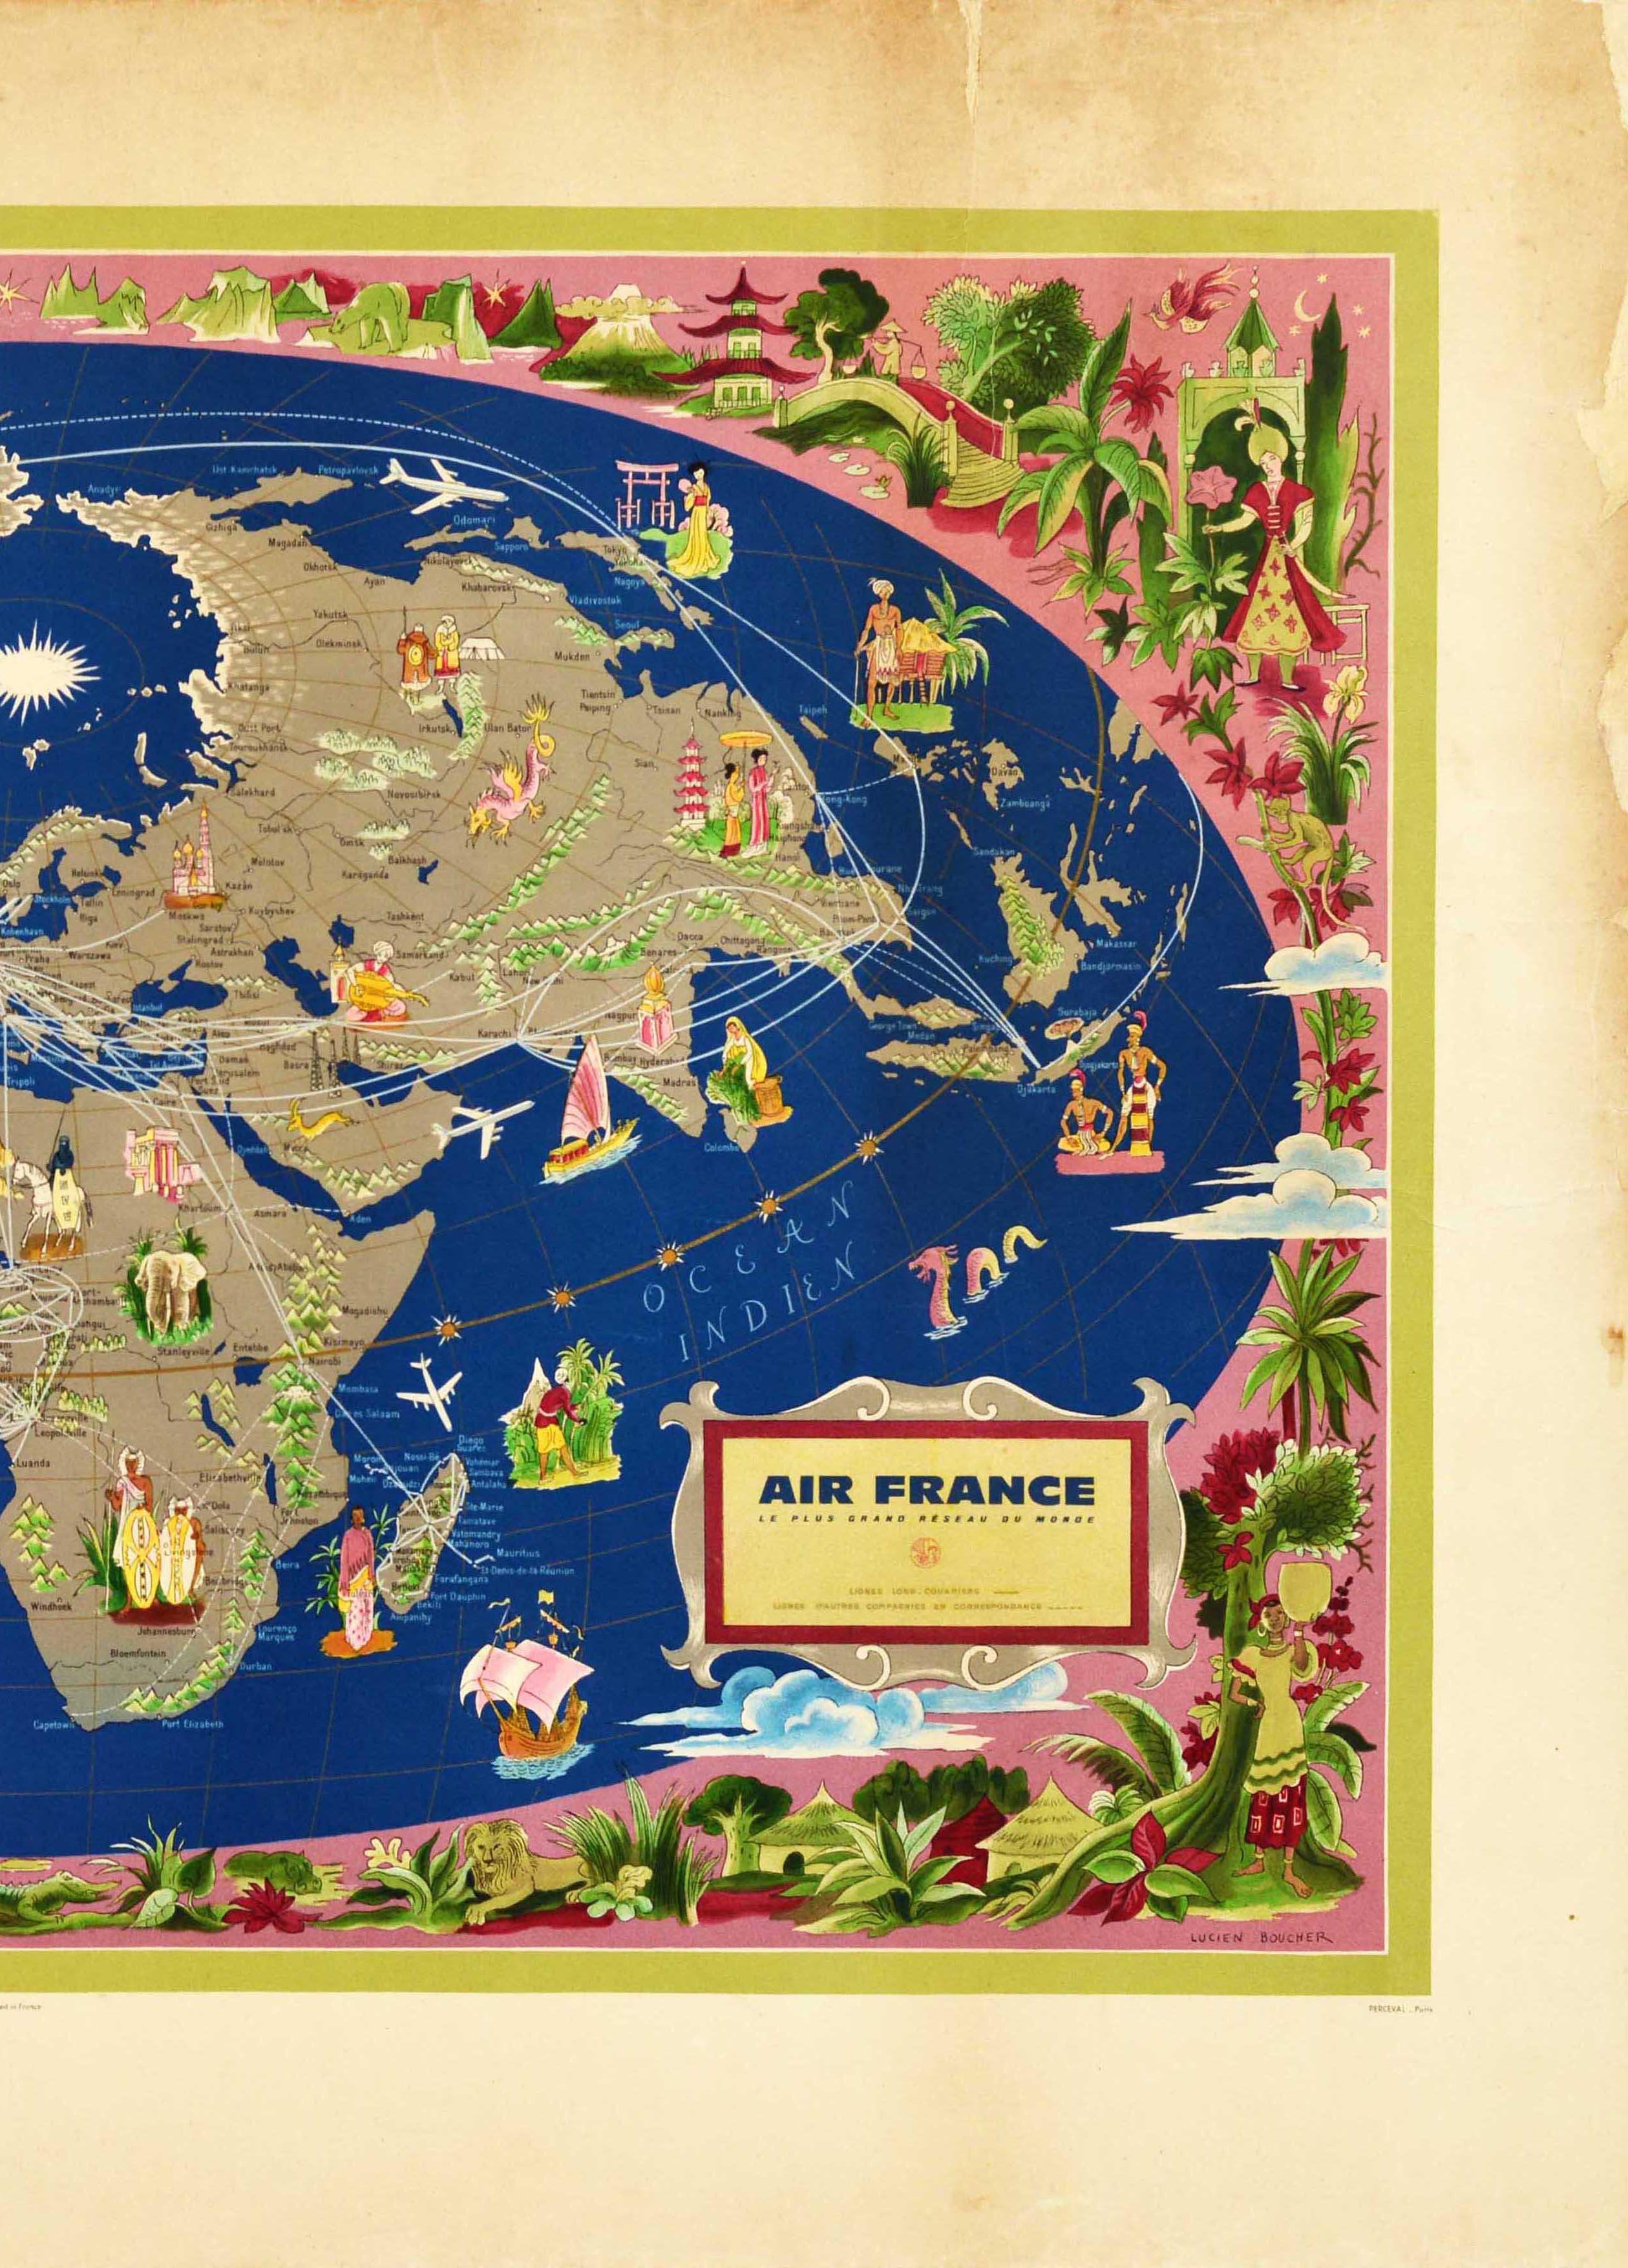 Original vintage Air France travel advertising poster featuring an illustrated map of the world by Lucien Boucher (1889-1971) depicting planes flying around the globe showing the airline routes to all countries with images of various activities and